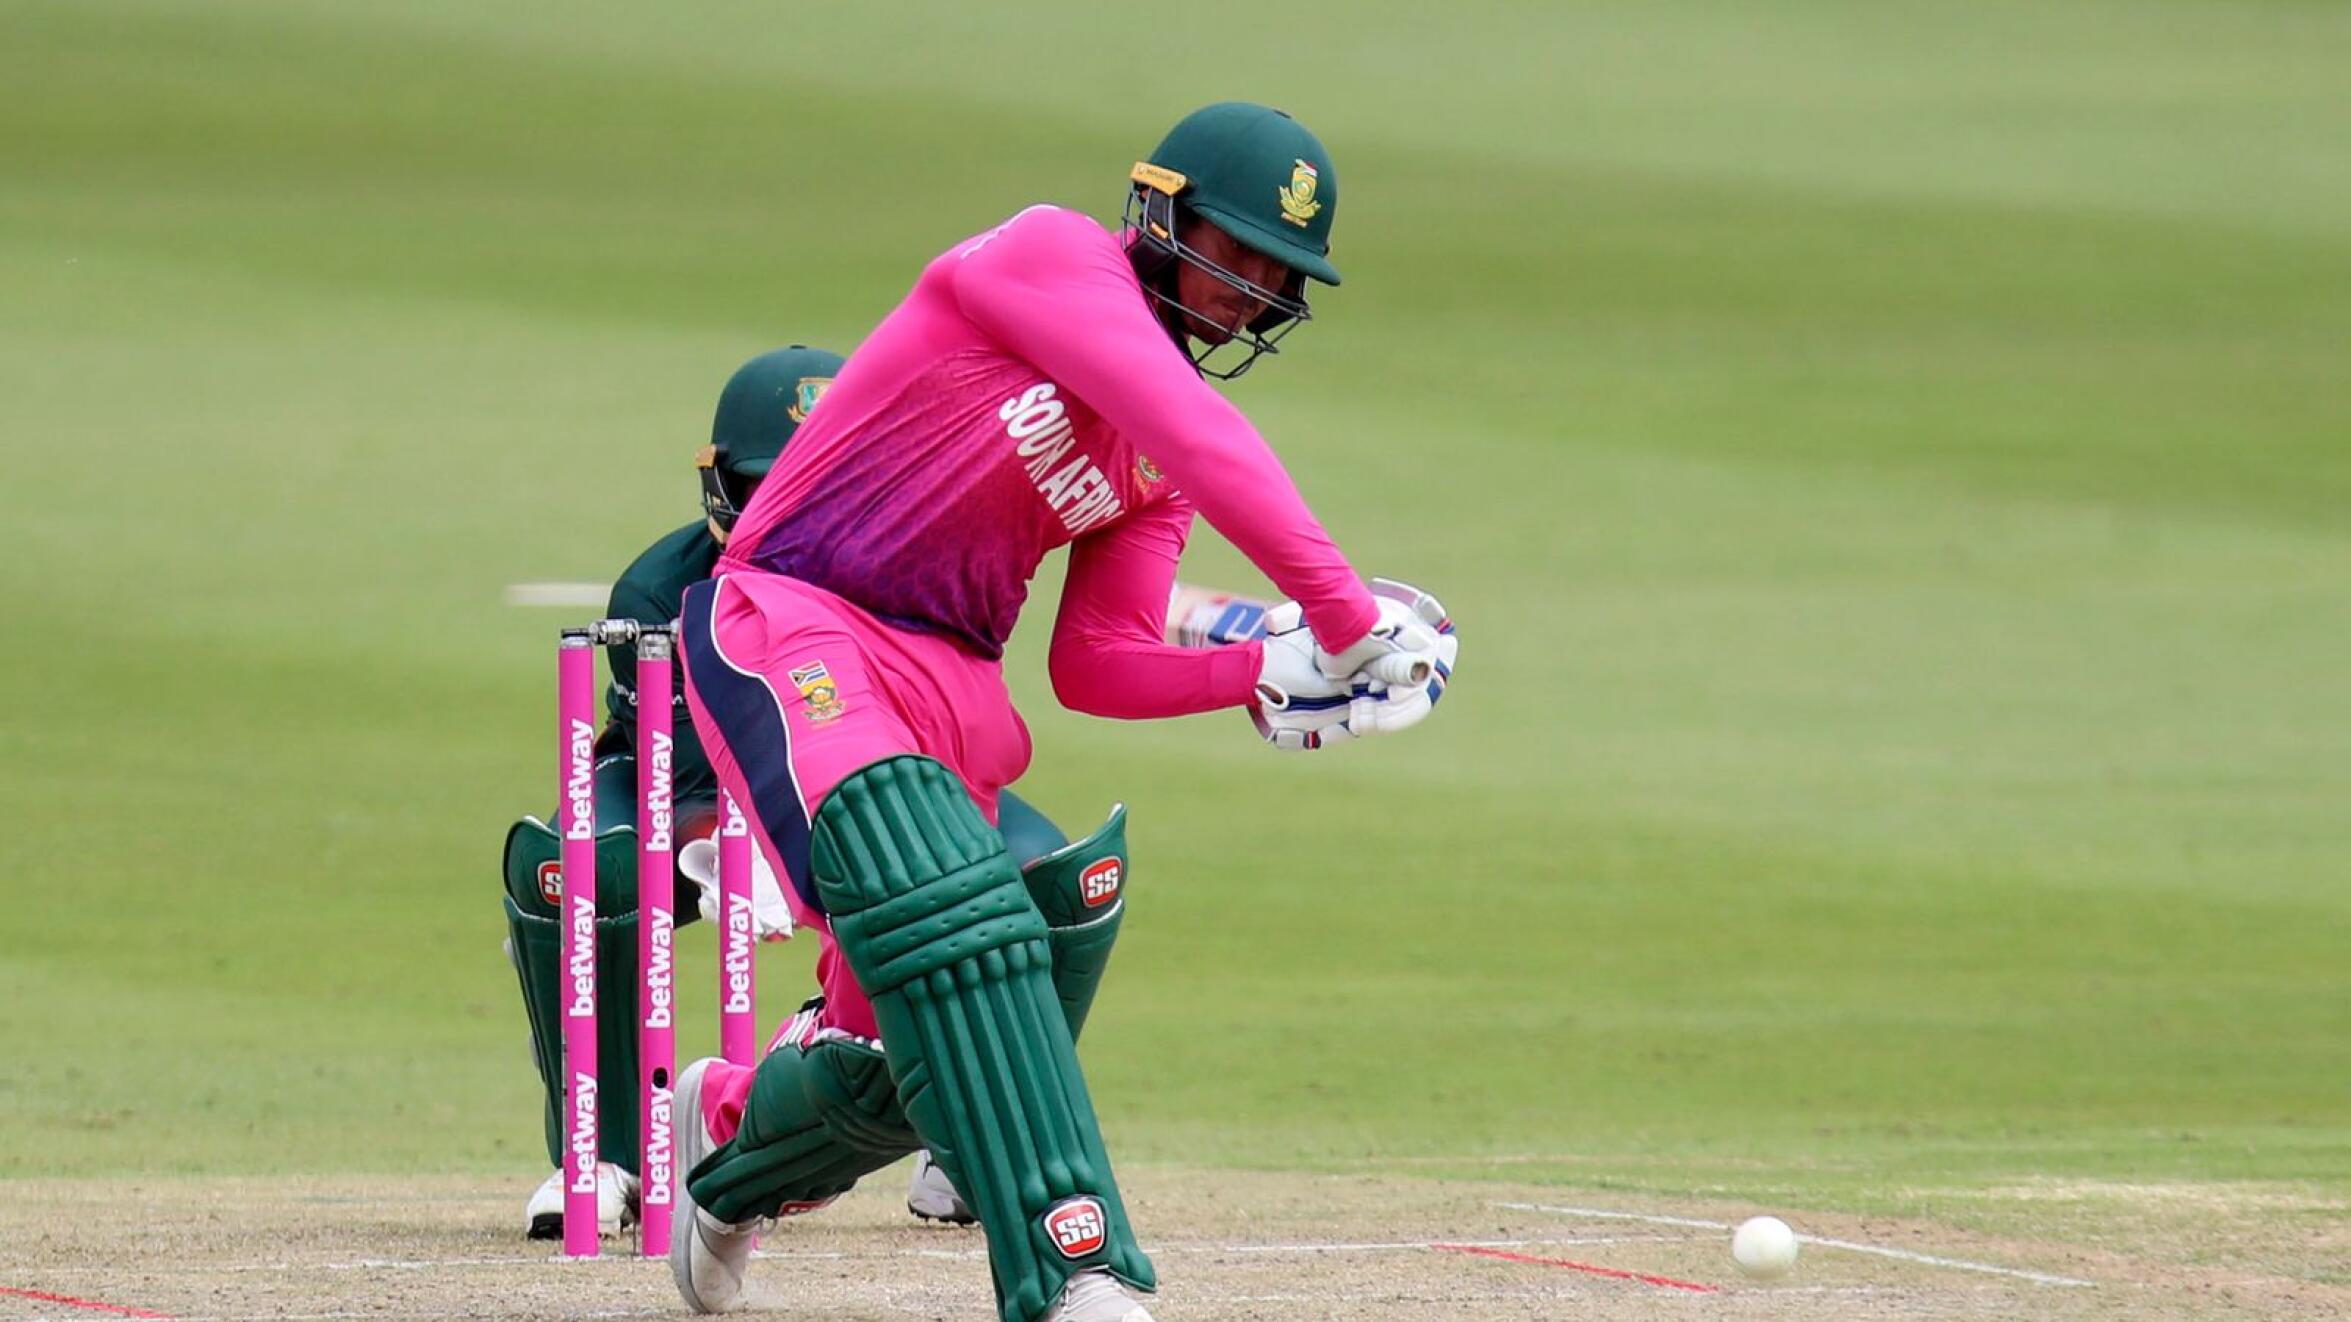 South Africa’s Quinton de Kock plays a shot during the 2nd ODI against Bangladesh at Wanderers Stadium in Johannesburg on Sunday